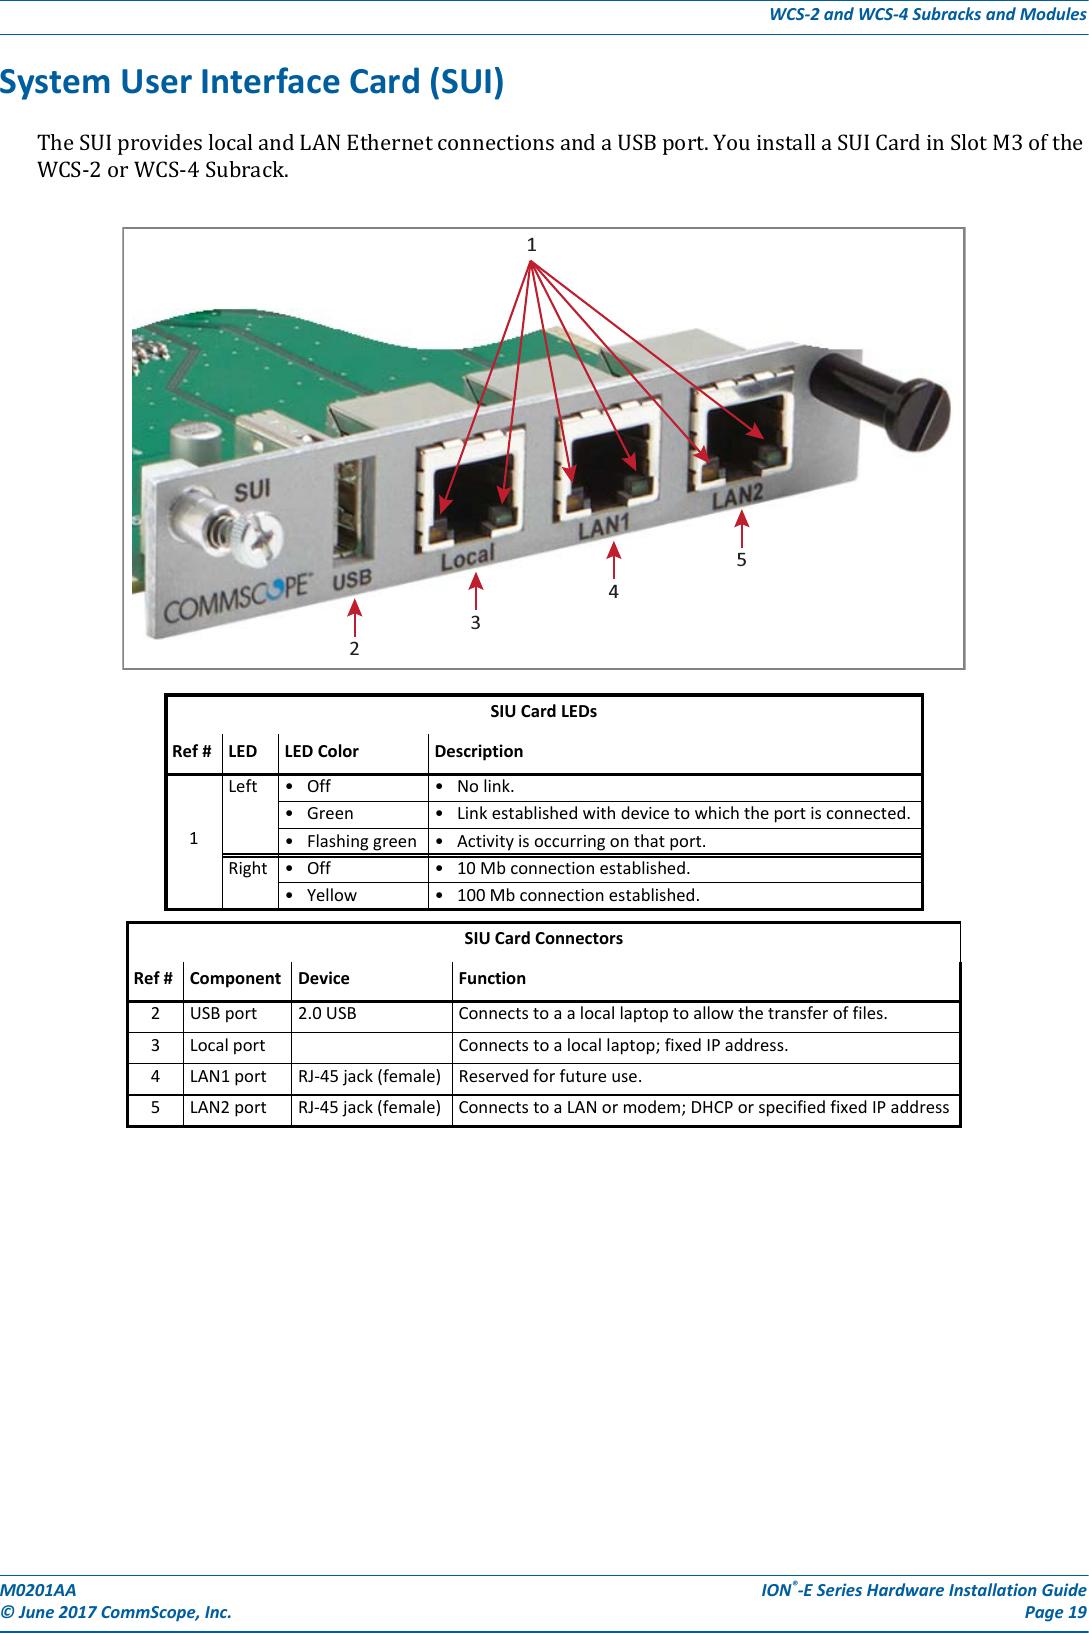 M0201AA ION®-E Series Hardware Installation Guide© June 2017 CommScope, Inc. Page 19WCS-2 and WCS-4 Subracks and ModulesSystem User Interface Card (SUI)TheSUIprovideslocalandLANEthernetconnectionsandaUSBport.YouinstallaSUICardinSlotM3oftheWCS-2orWCS-4Subrack.SIU Card LEDsRef # LED LED Color Description1Left  • Off • No link.• Green • Link established with device to which the port is connected.• Flashing green • Activity is occurring on that port.Right • Off • 10 Mb connection established.• Yellow • 100 Mb connection established.SIU Card ConnectorsRef # Component Device Function2USB port 2.0 USB Connects to a a local laptop to allow the transfer of files.3Local port Connects to a local laptop; fixed IP address.4LAN1 port RJ-45 jack (female) Reserved for future use.5LAN2 port RJ-45 jack (female) Connects to a LAN or modem; DHCP or specified fixed IP address23451